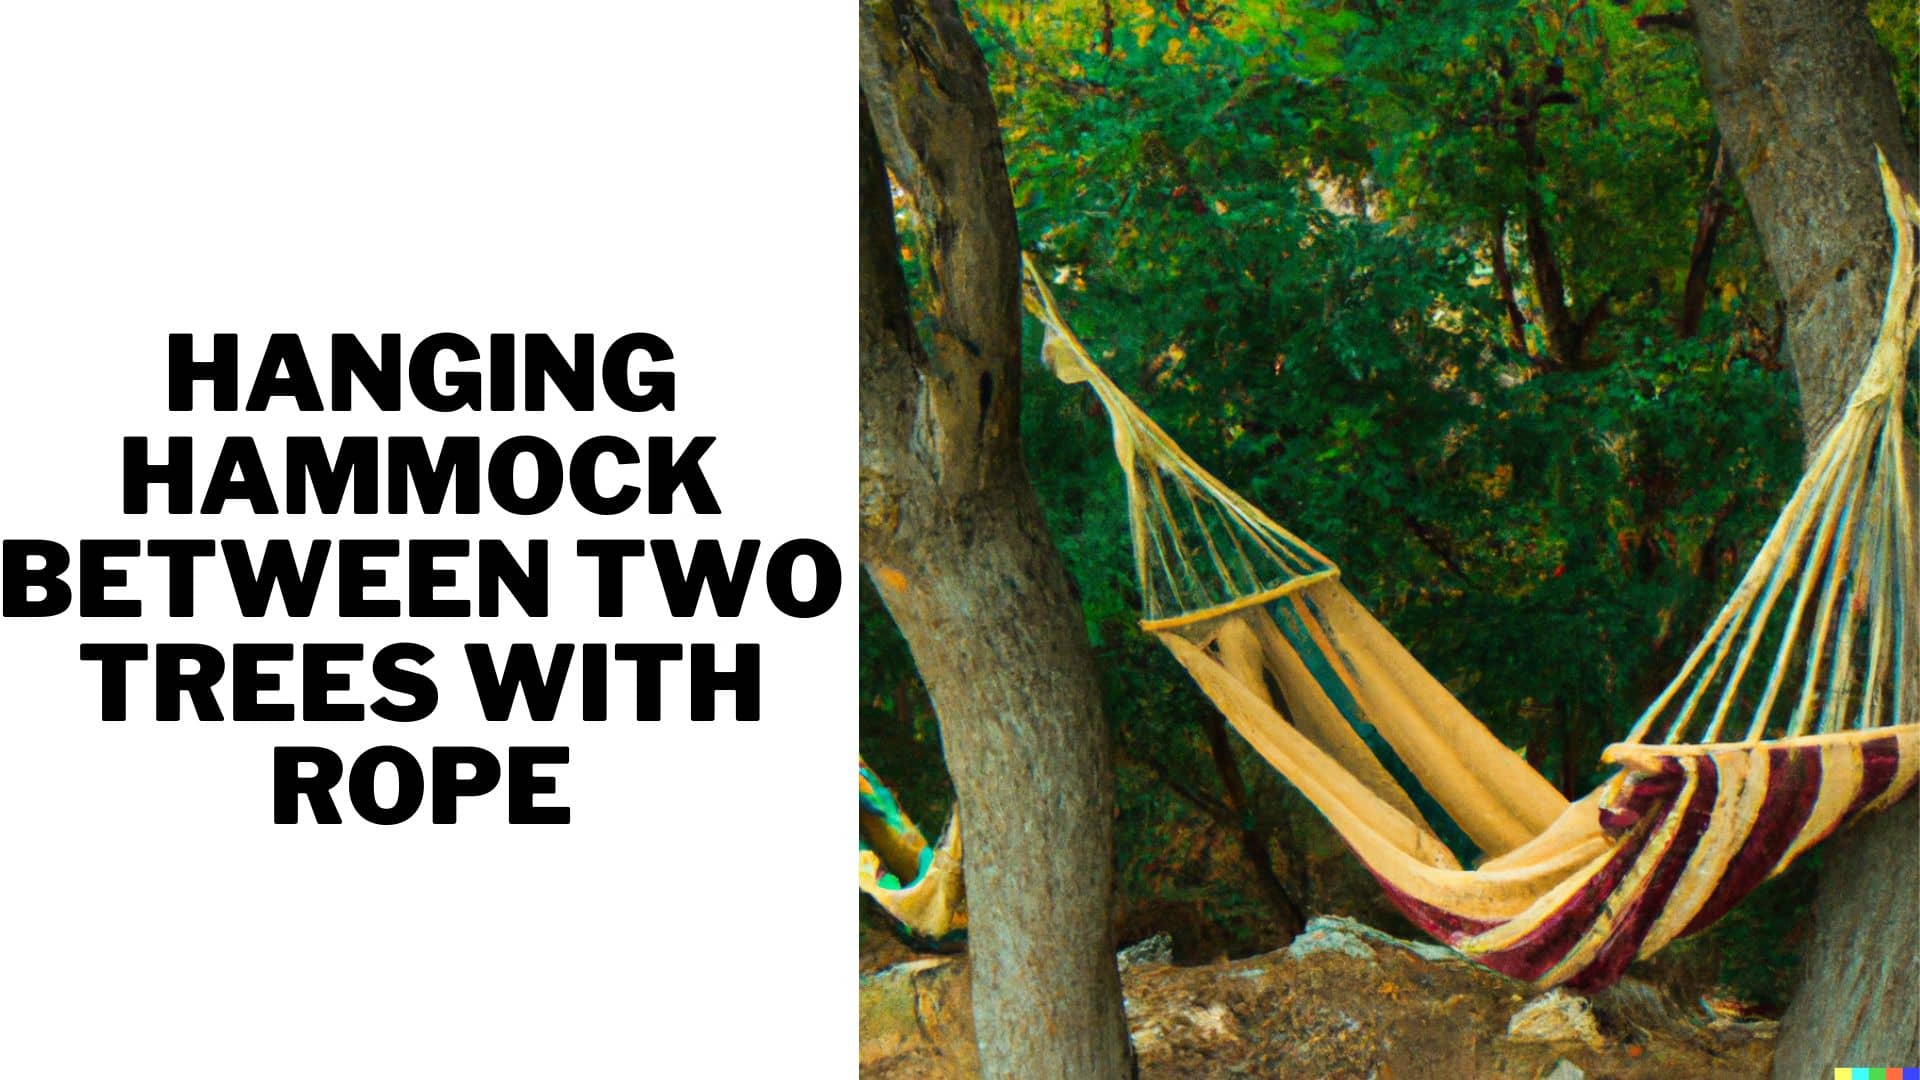 How to Hang a Hammock between Two Trees With Rope